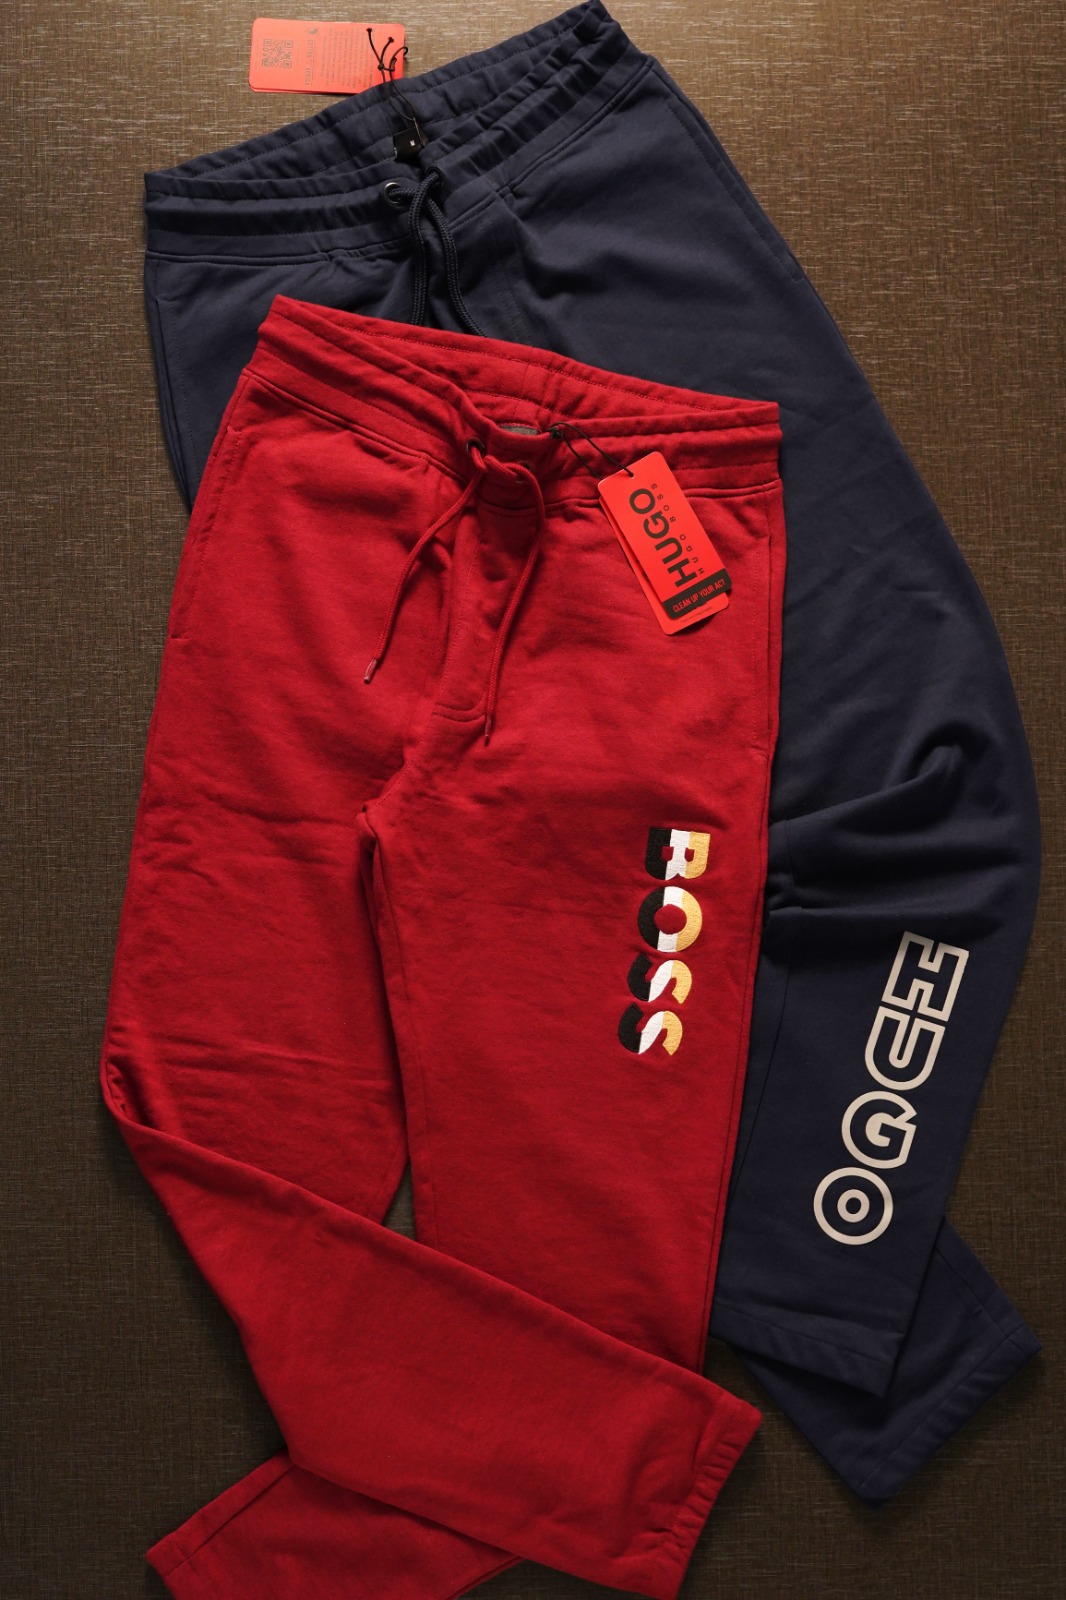 Out Adidas Yeezy Calabasas Track Pants – Fonjep News - adidas Originals has  a bunch of new - How to Get Kanye West's Sold